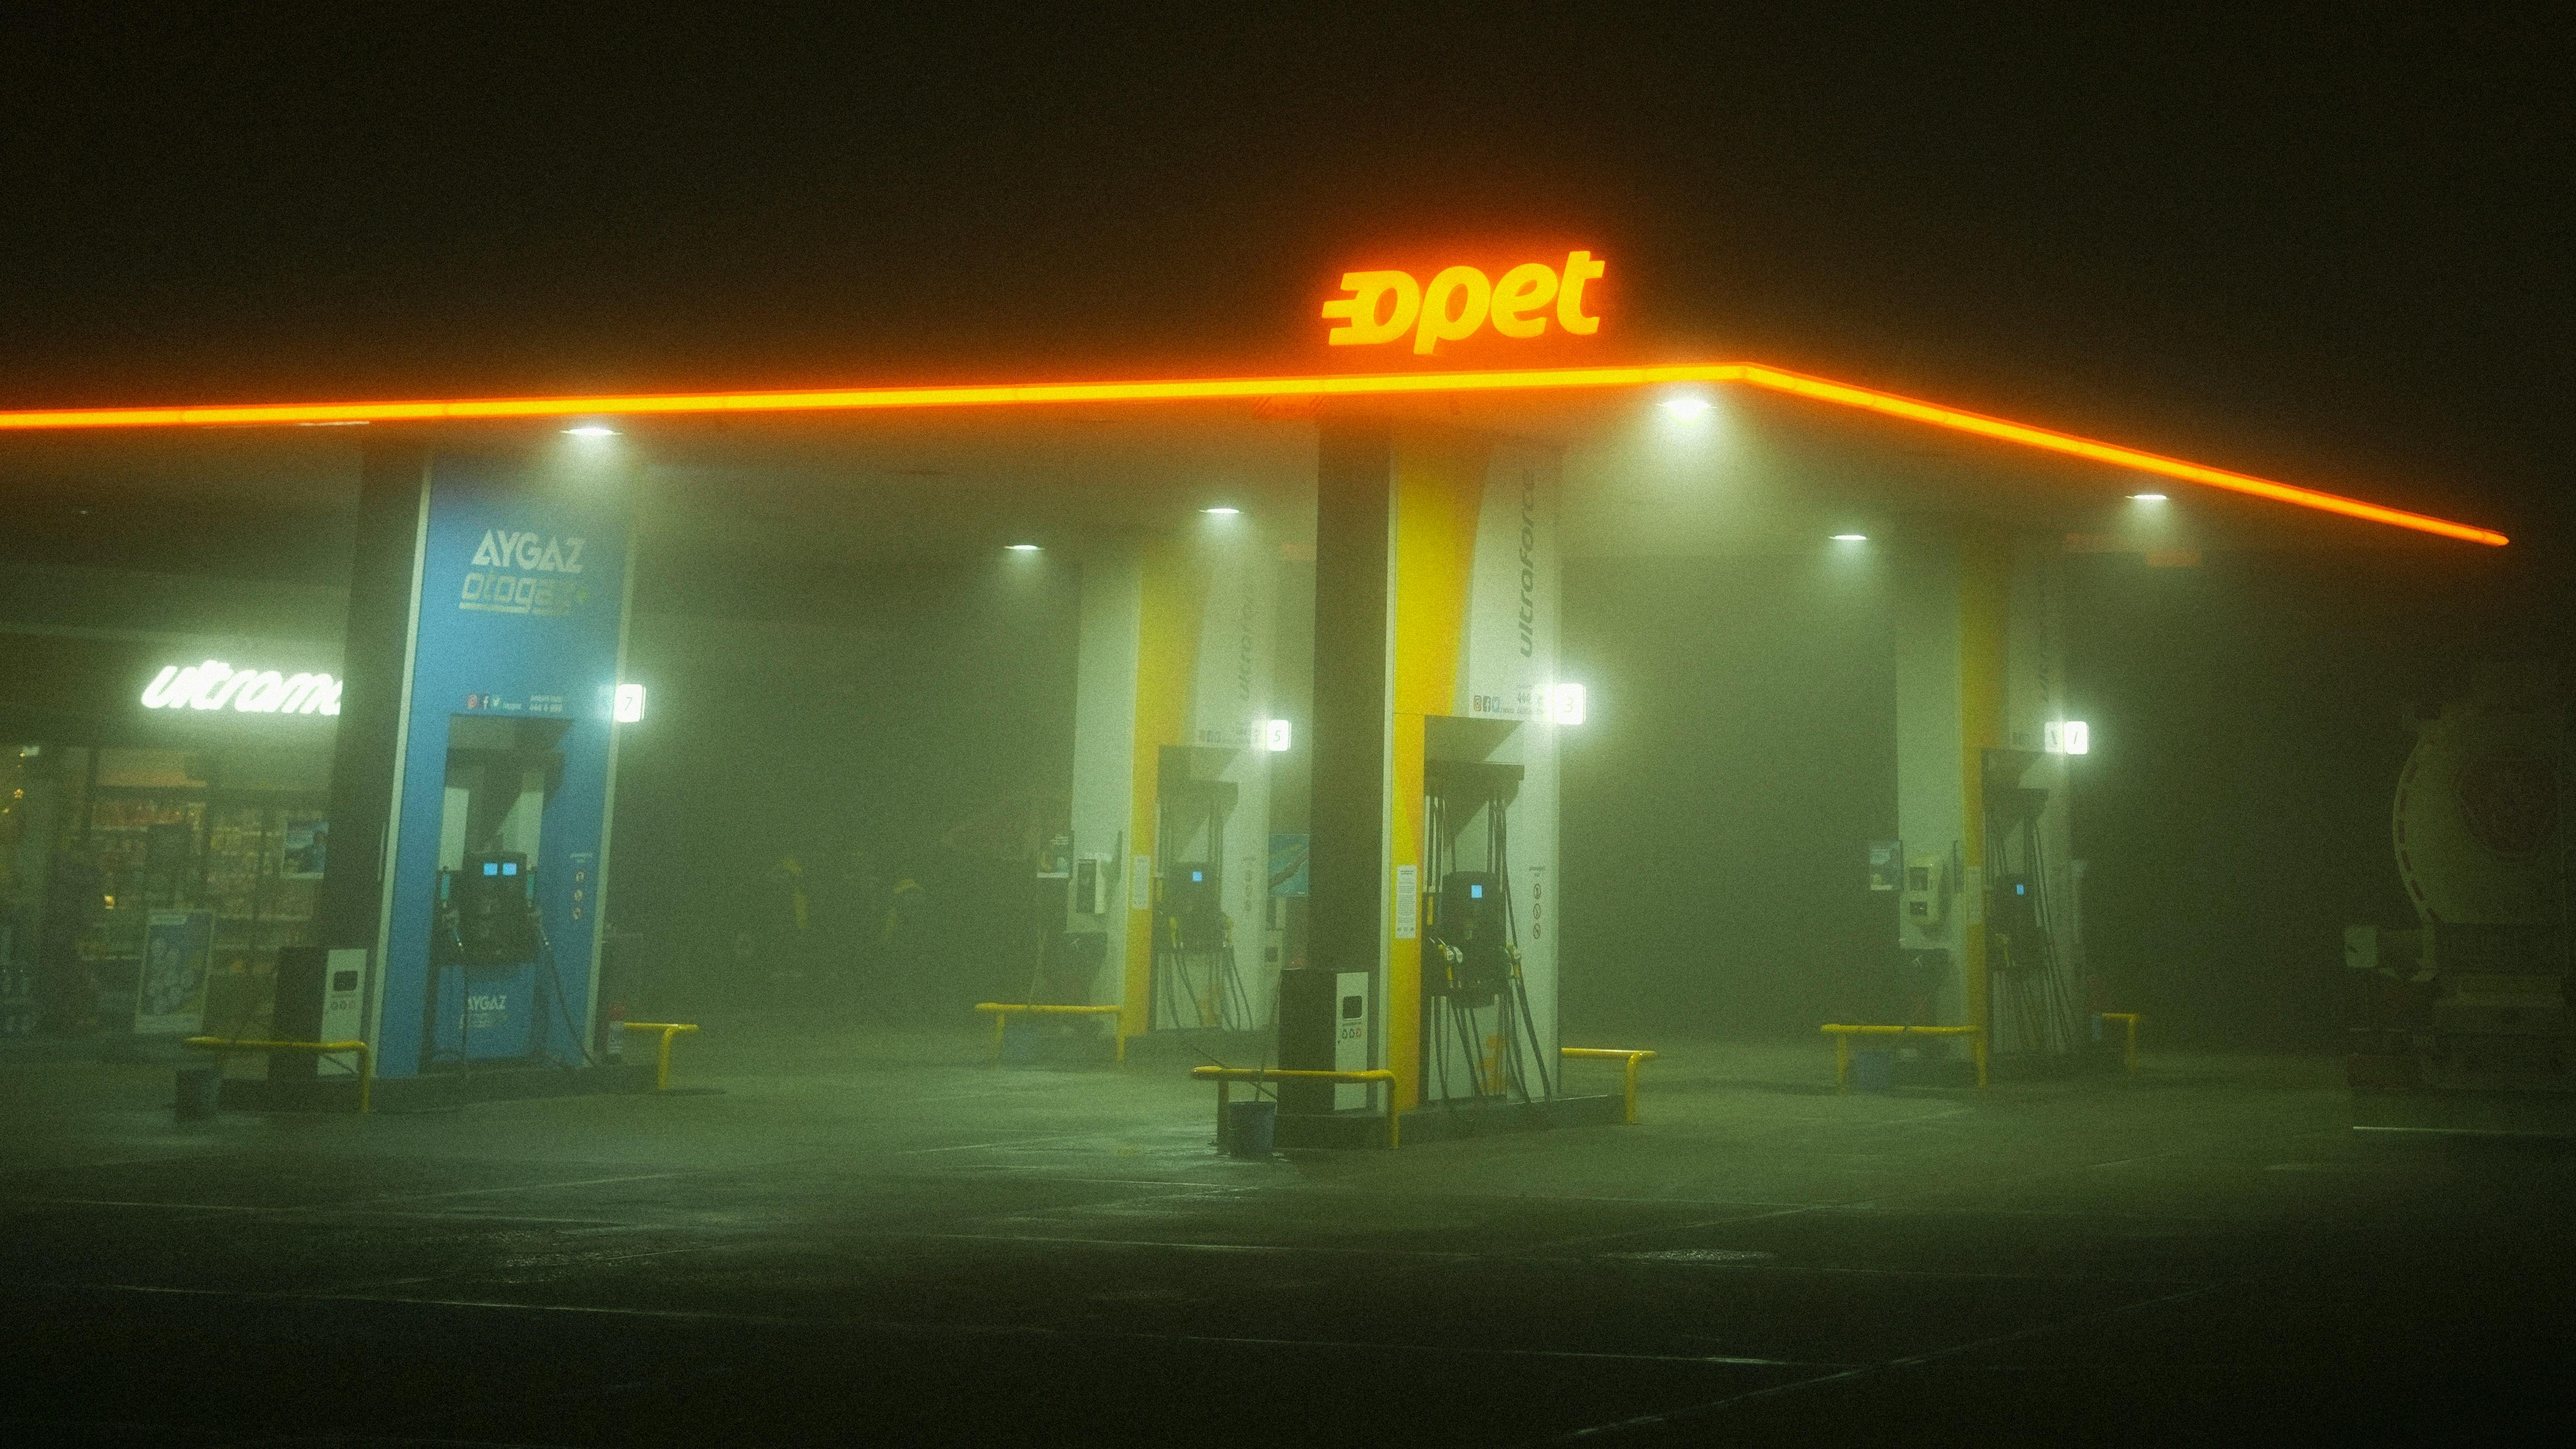 ITAP of a gas station on a rainy night (taken with original Google Pixel  from inside my car)